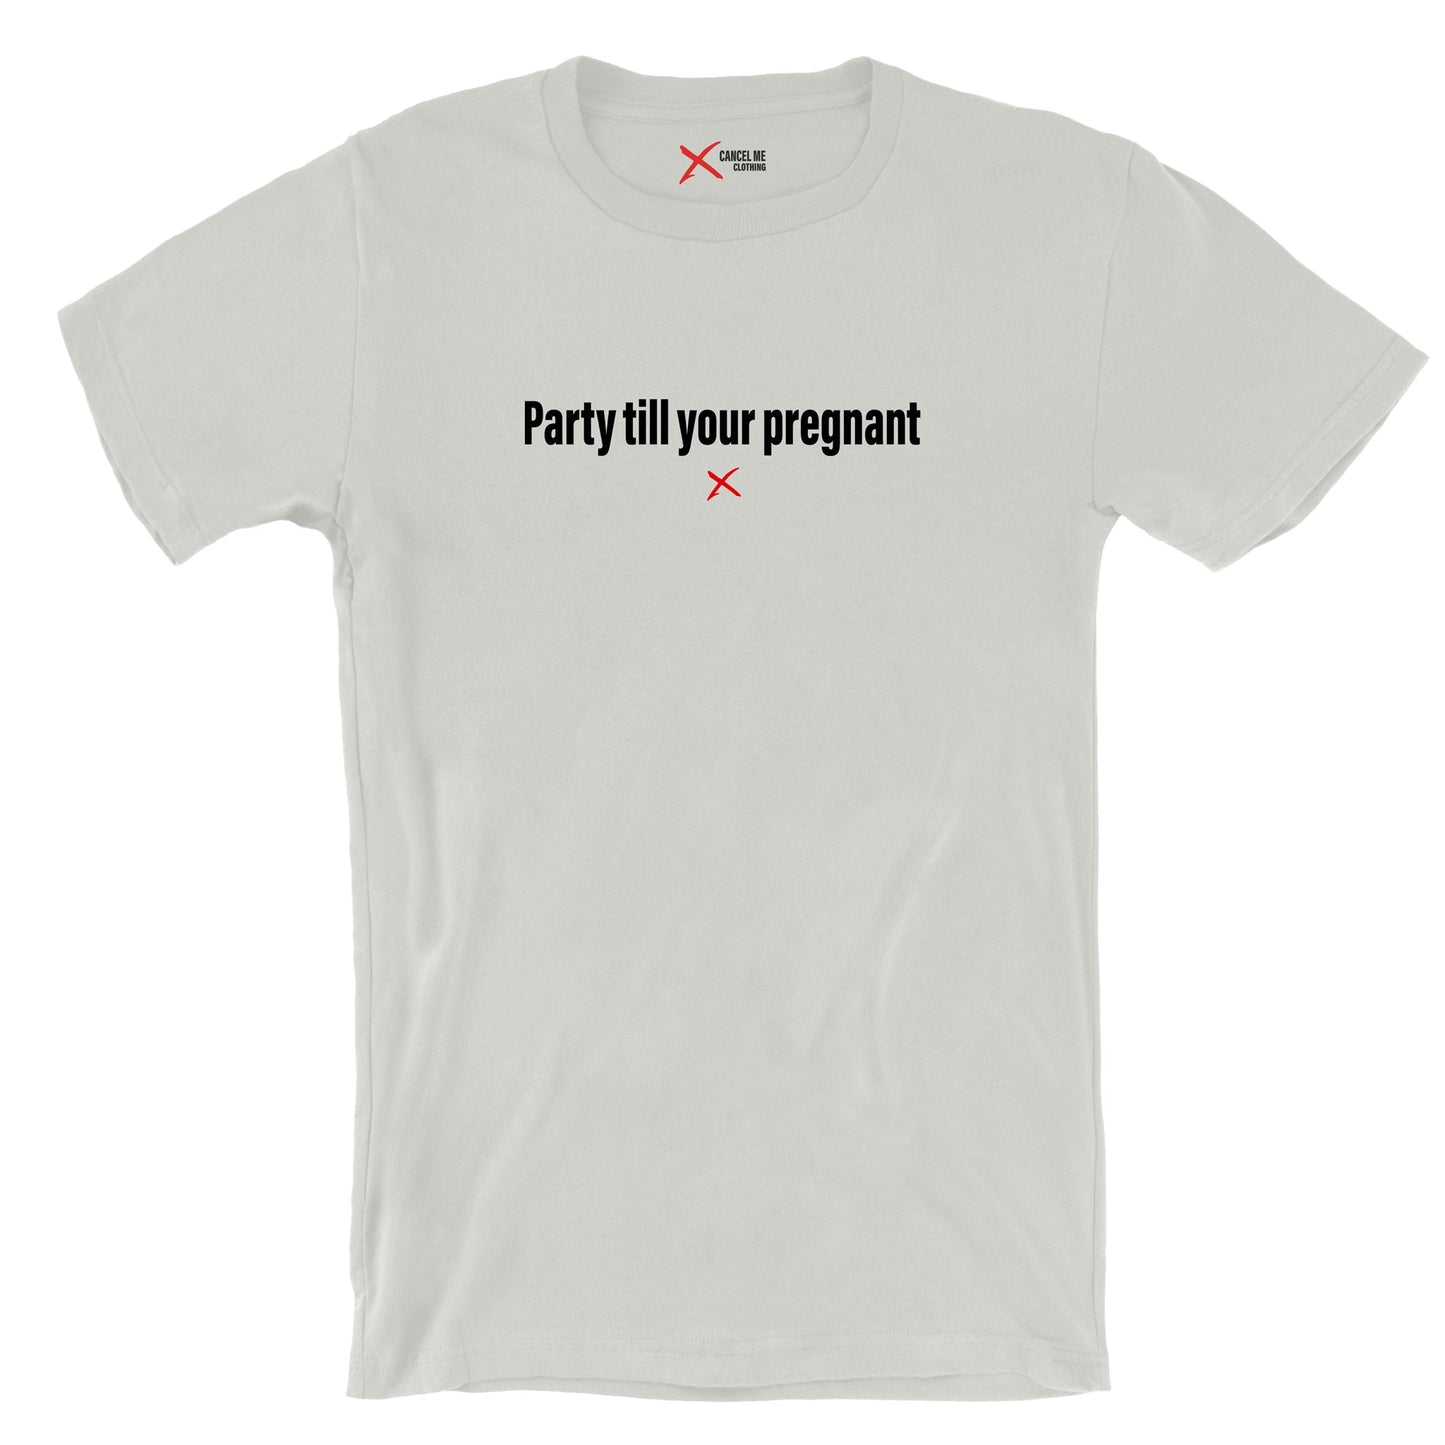 Party till your pregnant - Shirt